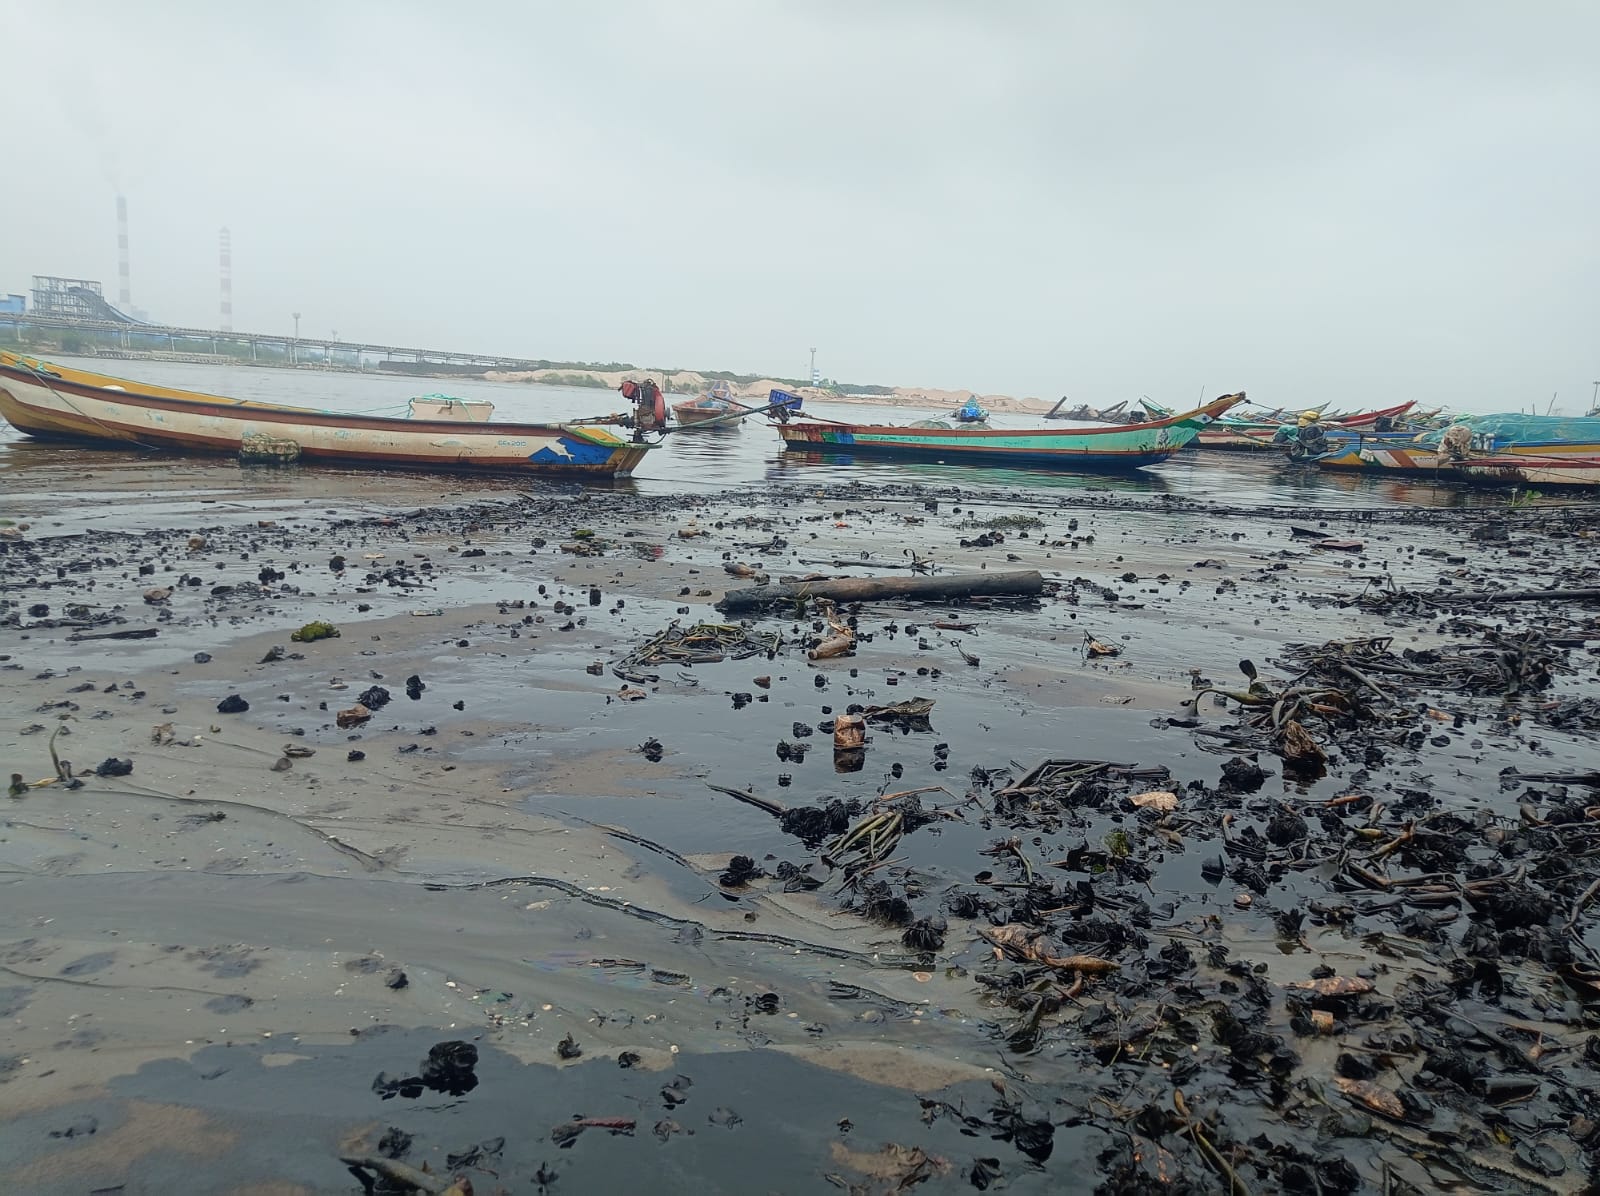 The oil spill has extended 20 sq km, according to the Indian Coast Guard. (Supplied)